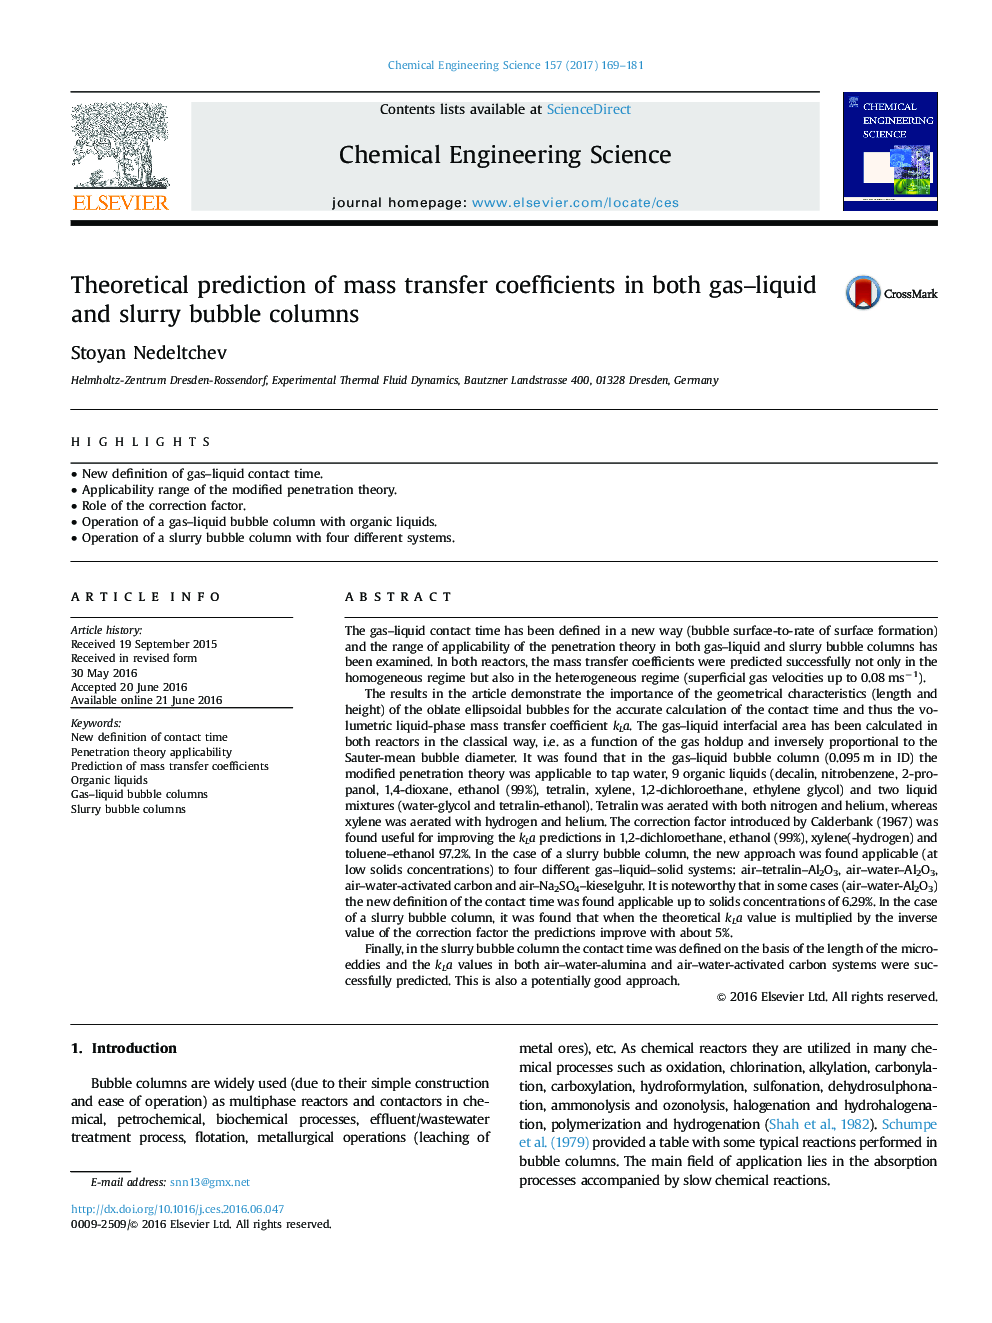 Theoretical prediction of mass transfer coefficients in both gas-liquid and slurry bubble columns